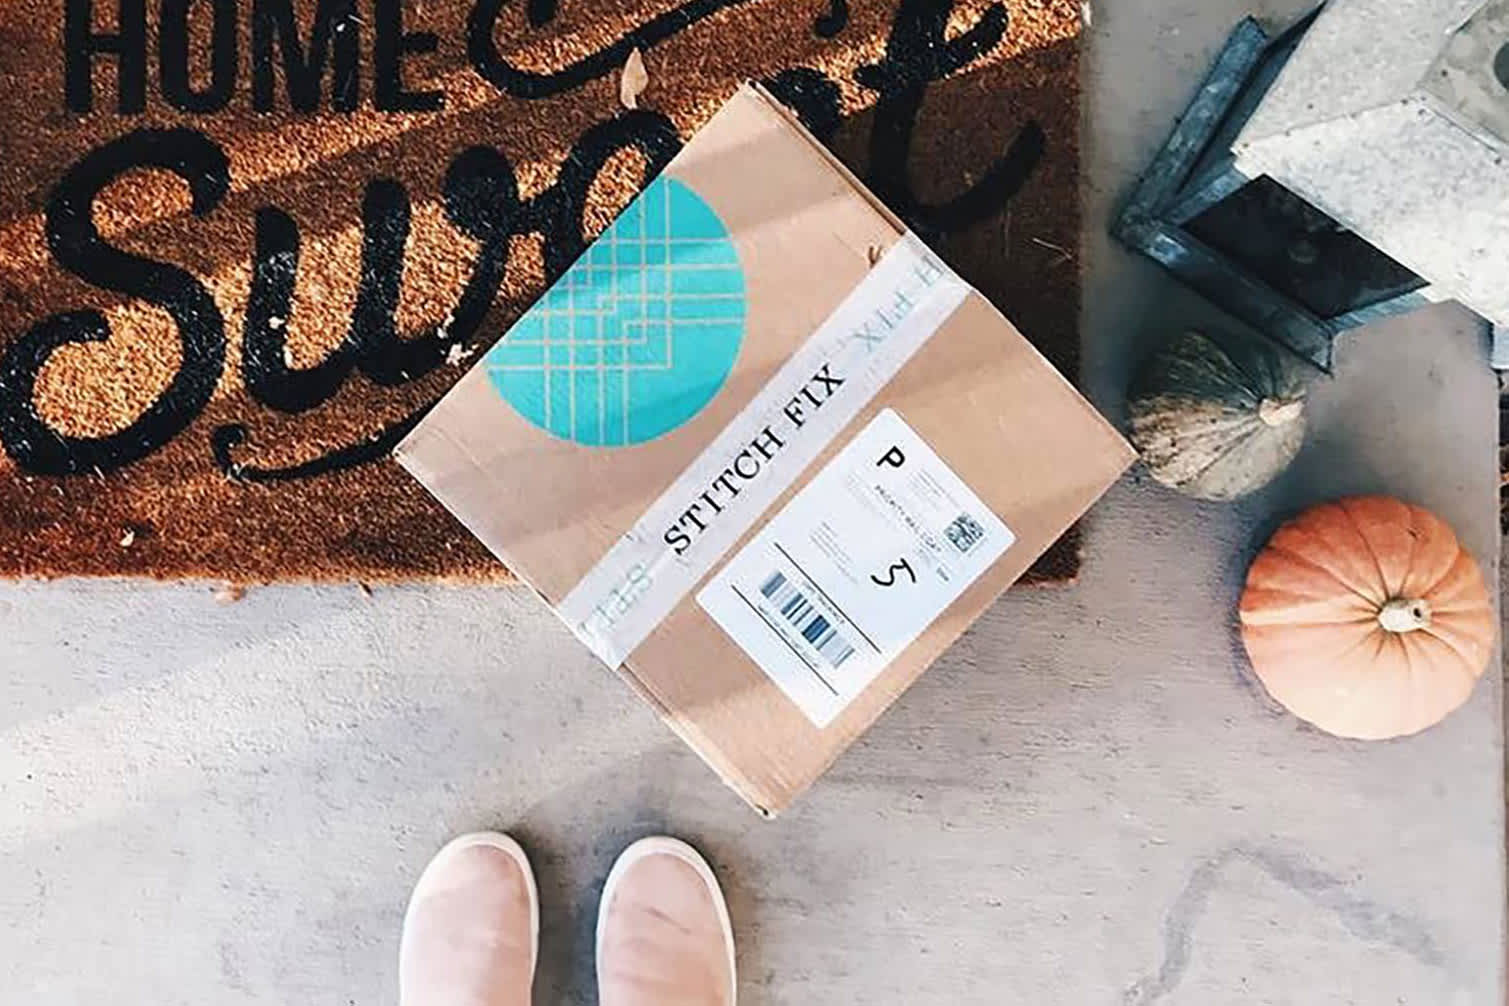 The CEO received from Stitch Fix says that “the moment felt right” for the executive transition